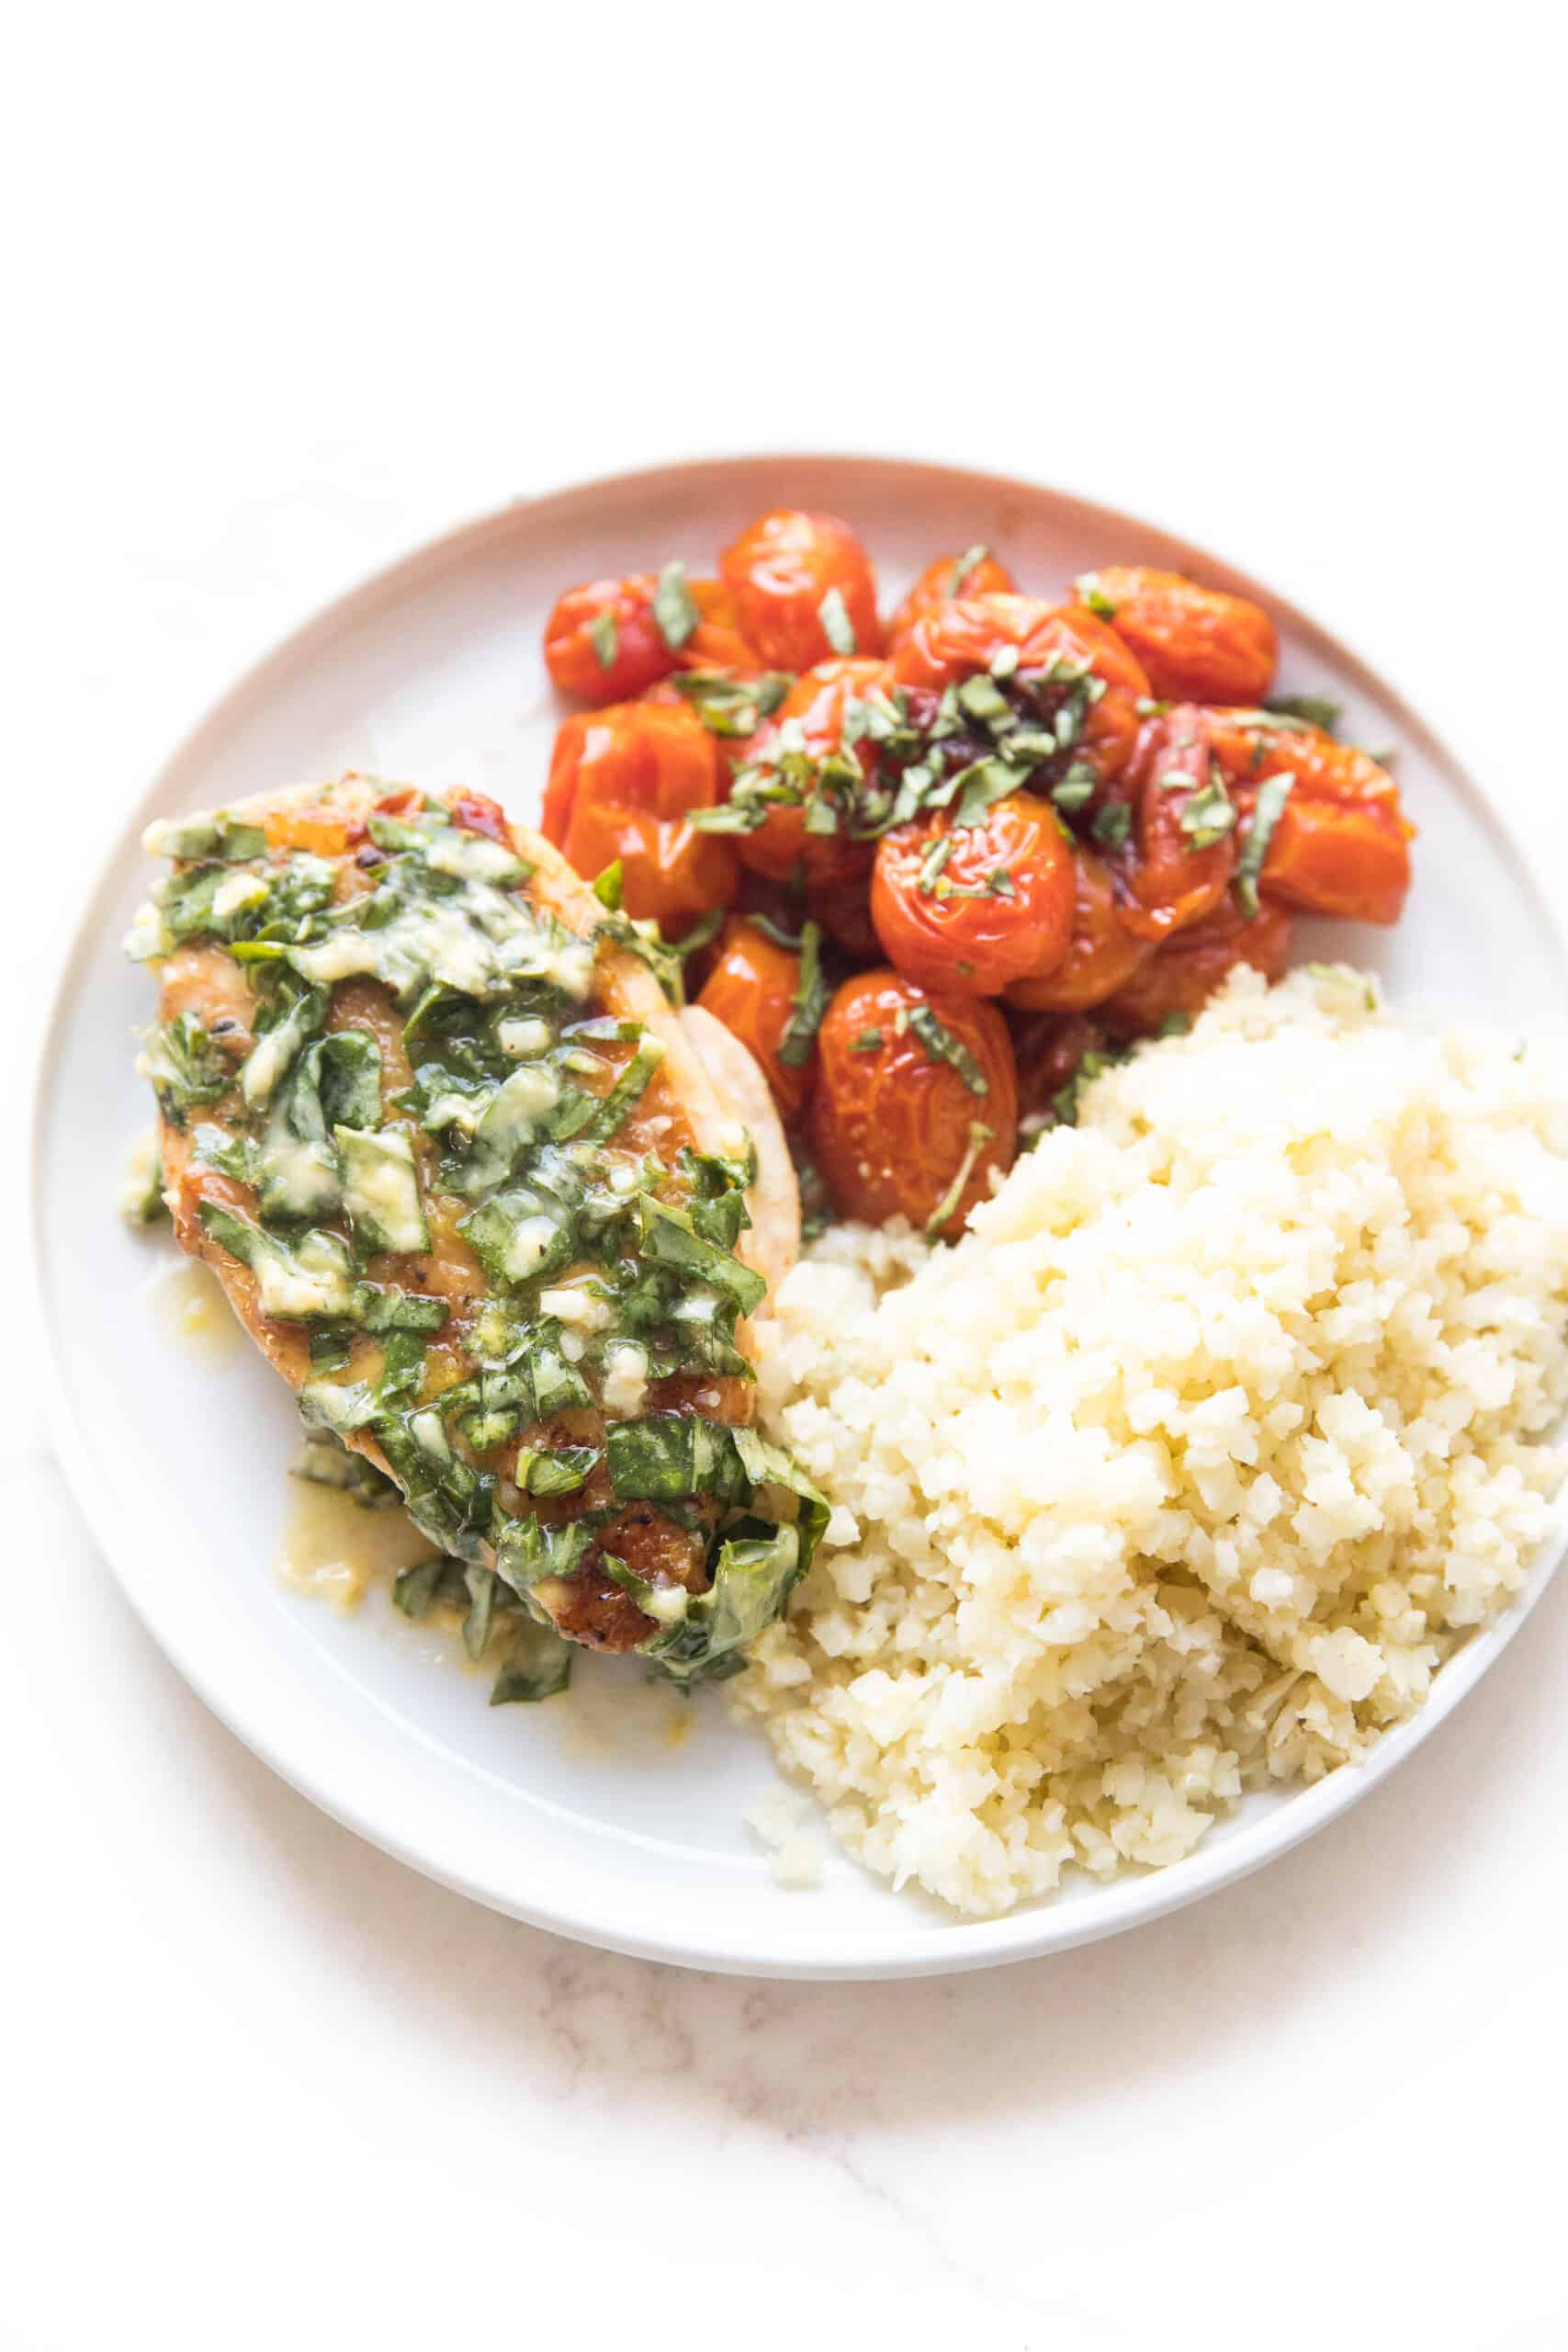 chicken with basil butter, blistered tomatoes and cauliflower rice on a white plate